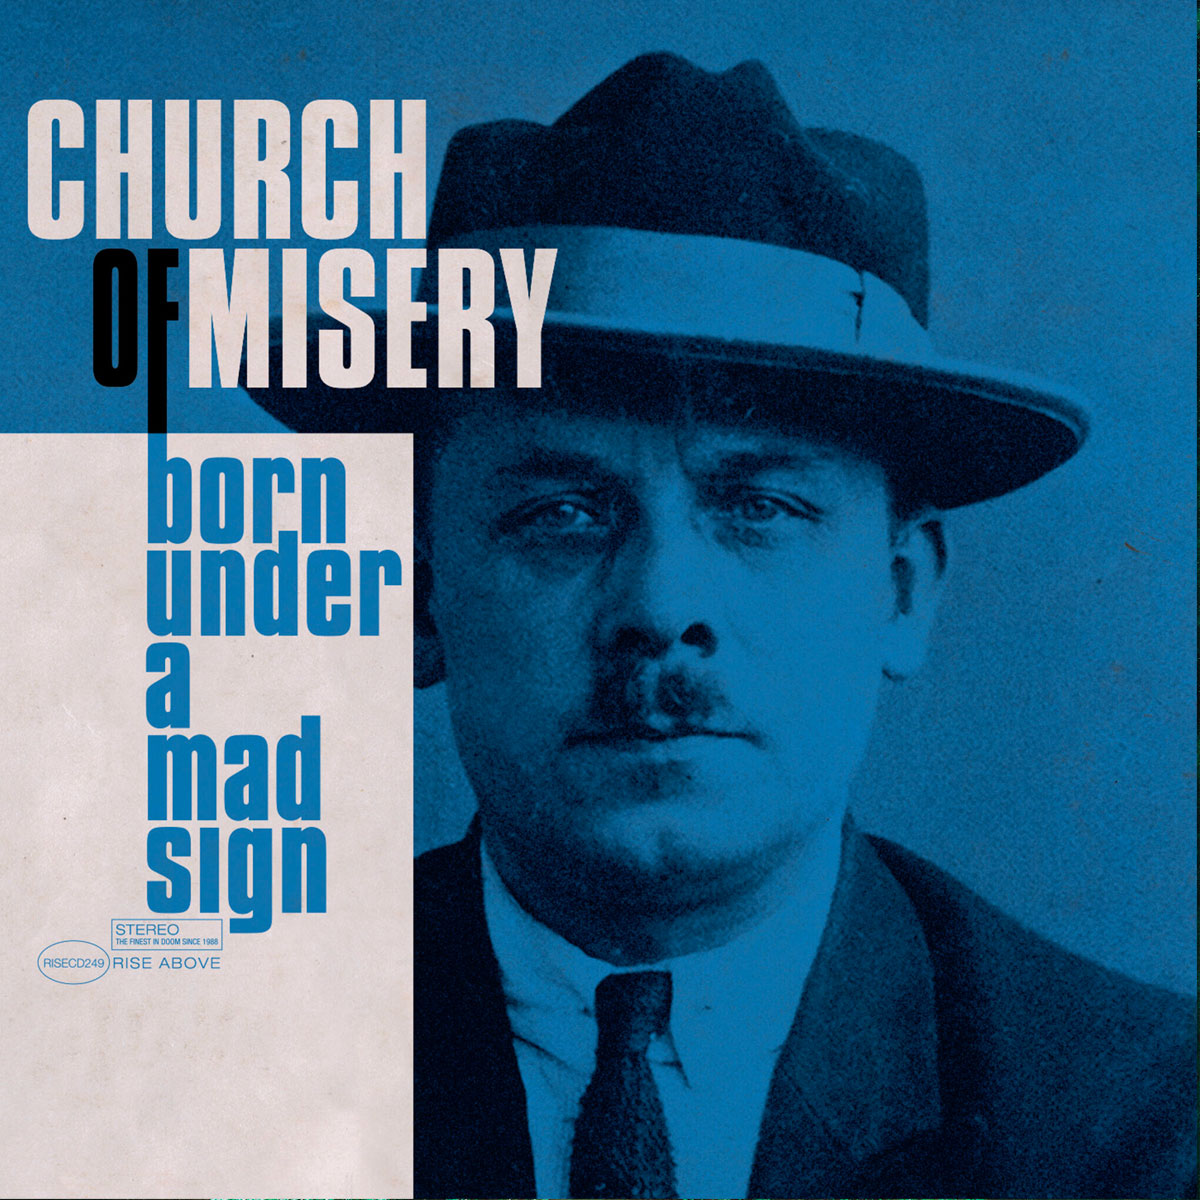 Born Under a Mad Sign by Church of Misery